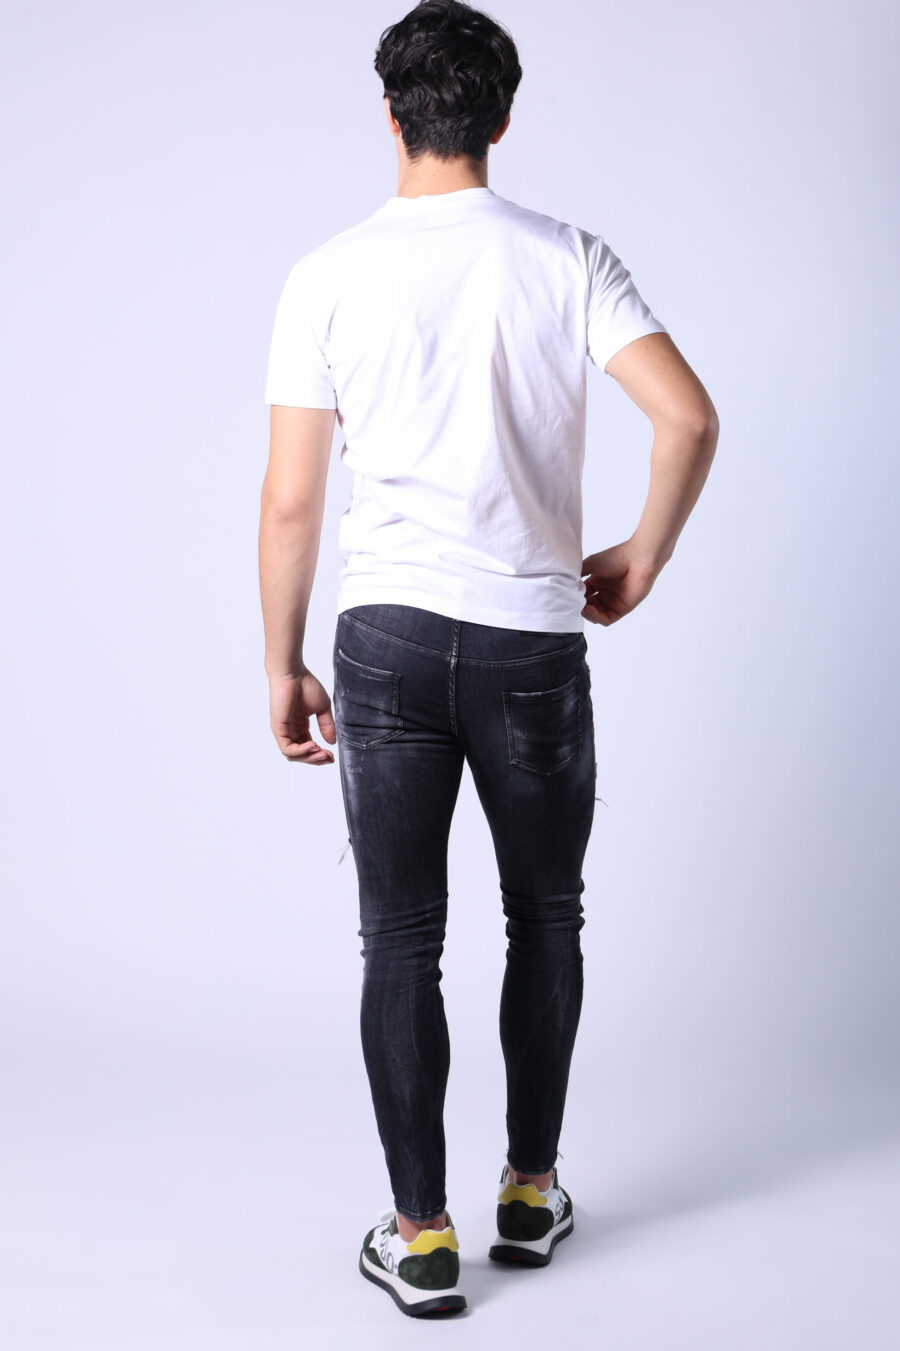 Skater jean trousers black with rips and semi-worn - Untitled Catalog 05317